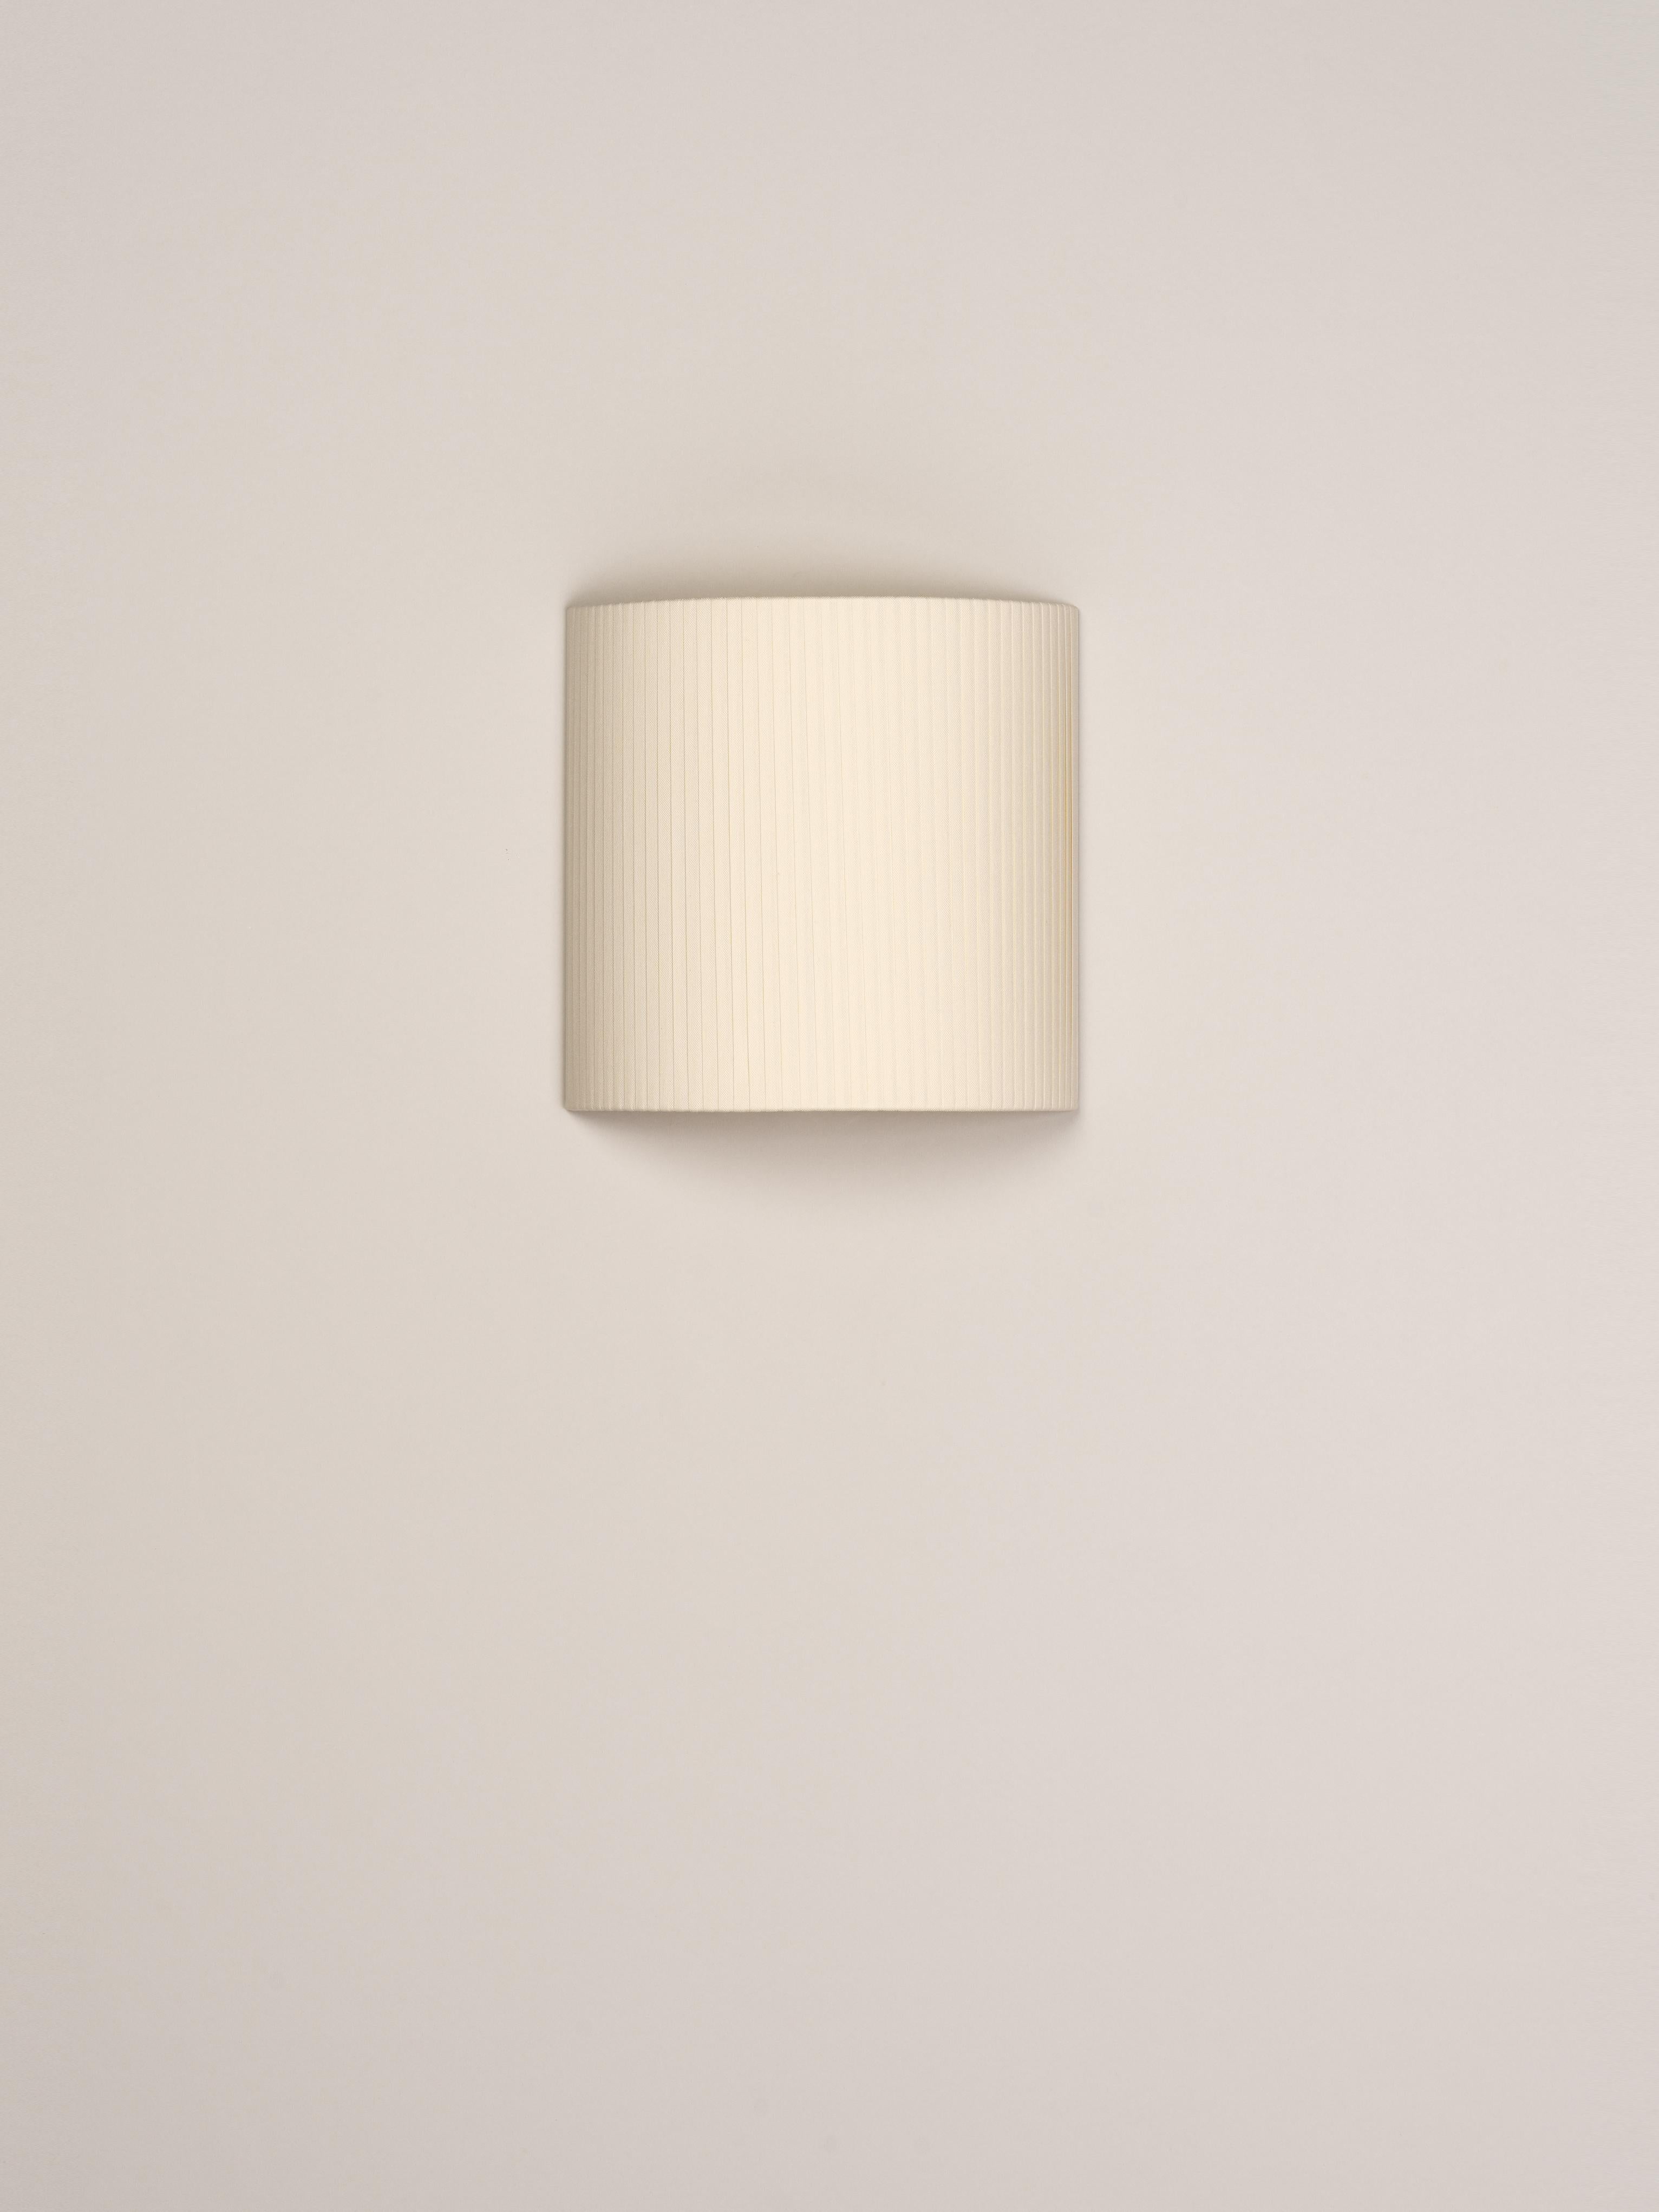 Natural comodín cuadrado wall lamp by Santa & Cole
Dimensions: D 31 x W 13 x H 30 cm
Materials: Metal, ribbon.

This minimalist wall lamp humanises neutral spaces with its colourful and functional sobriety. The shade is fondly hand-ribboned,